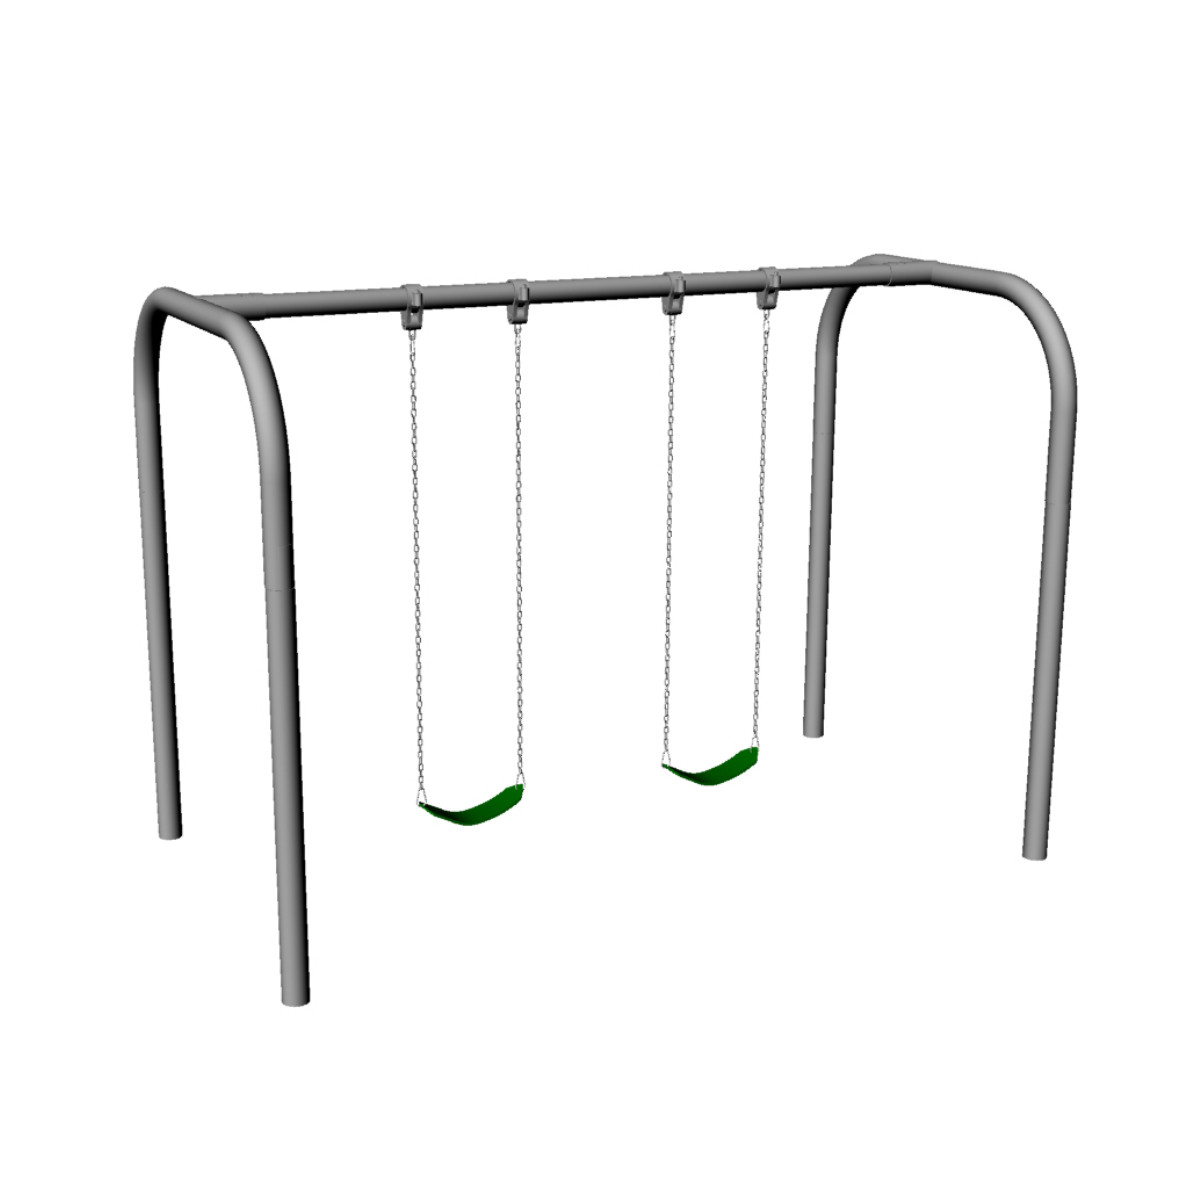 Arch Frame Swing Set with 2 Swings